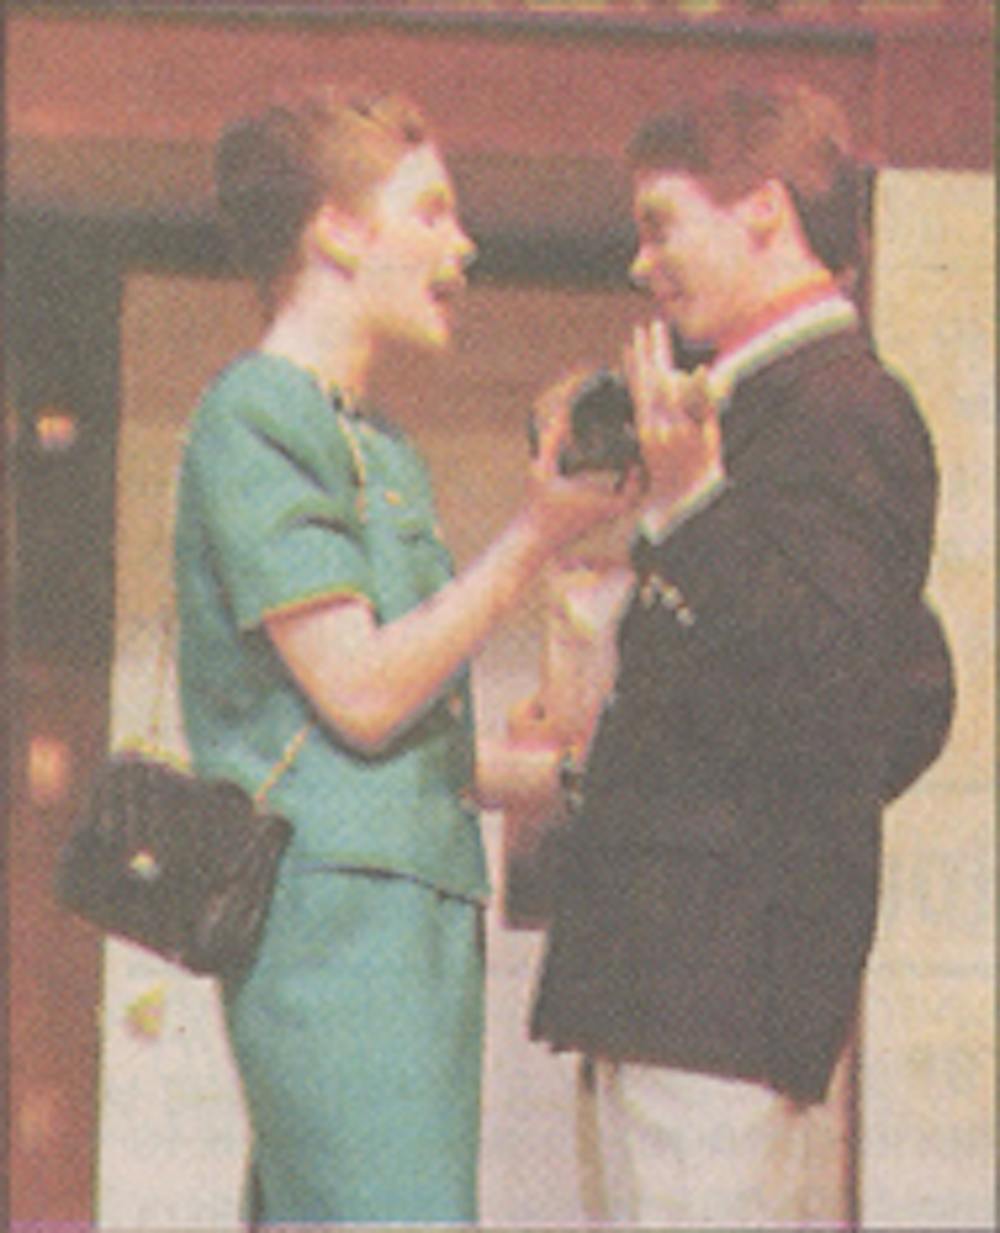 <p>Scott Halberstadt played Fredrick Fellows in Ball State’s 1999 production of “Noises Off." This photo was published in the April 7, 1999, issue of The Daily News. <strong>Ball State Digital Media Repository</strong></p>